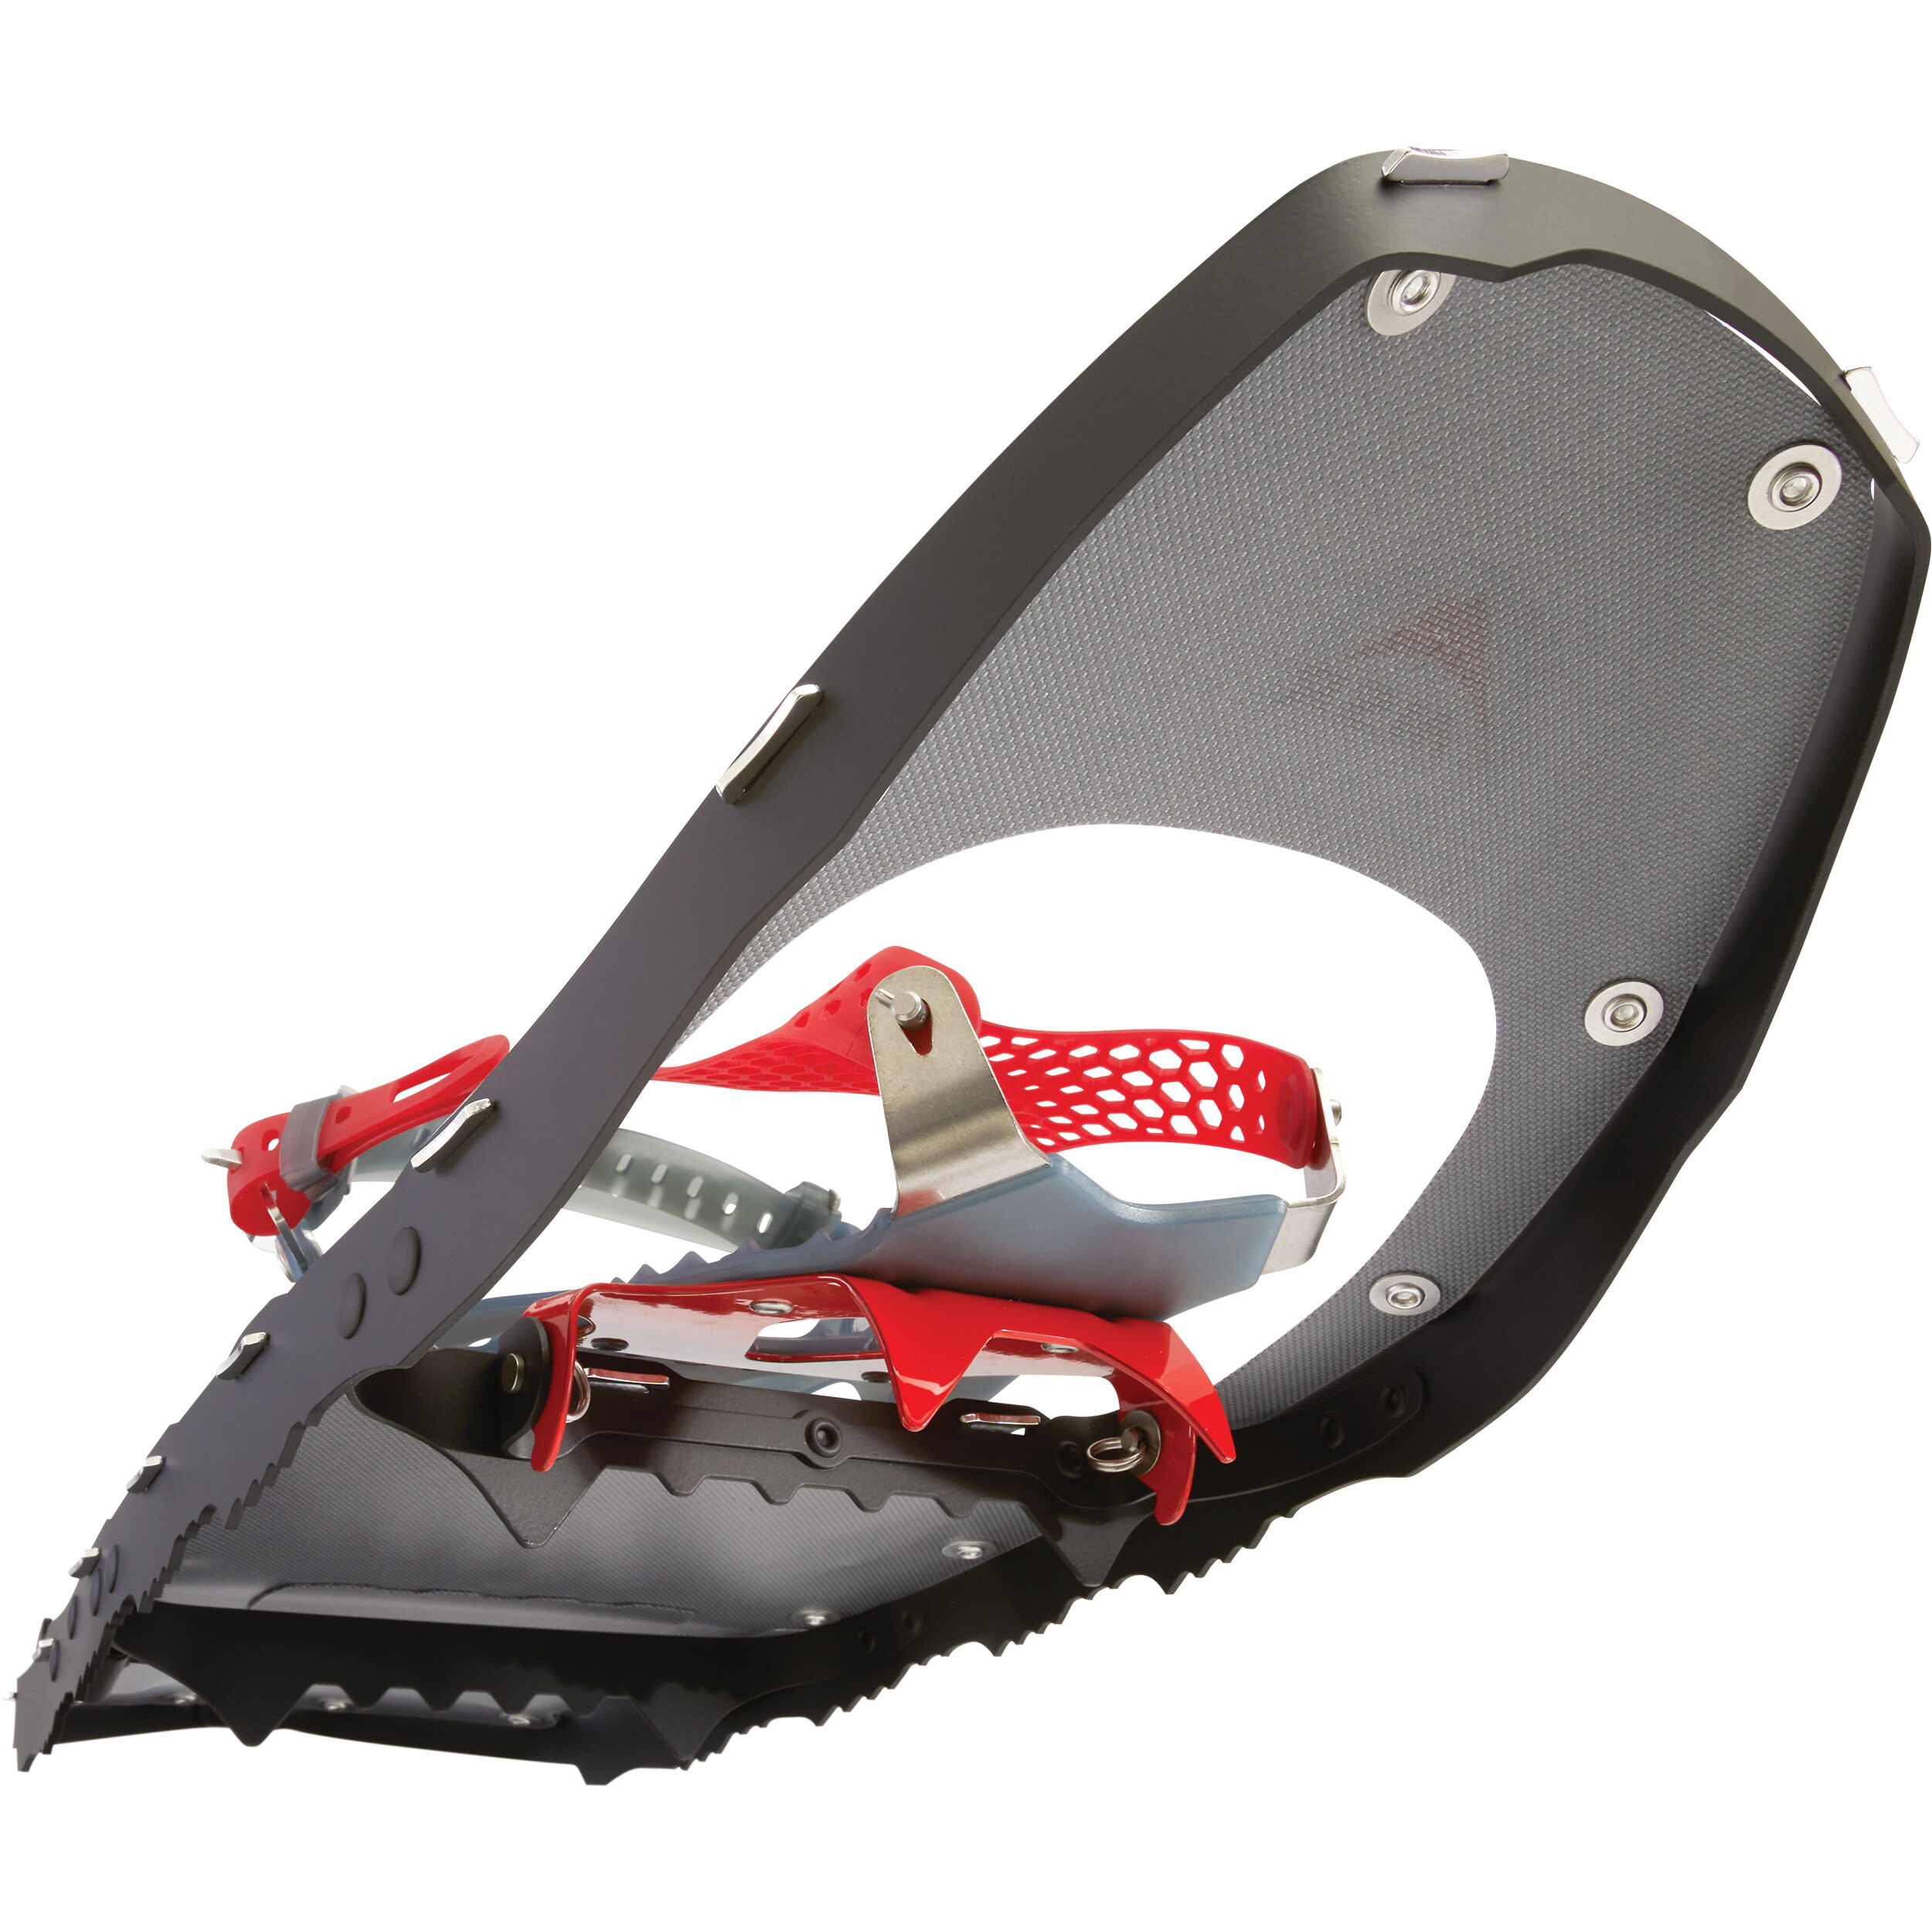 MSR Lightning Ascent Backcountry & Mountaineering Snowshoes with Paragon Bindings 